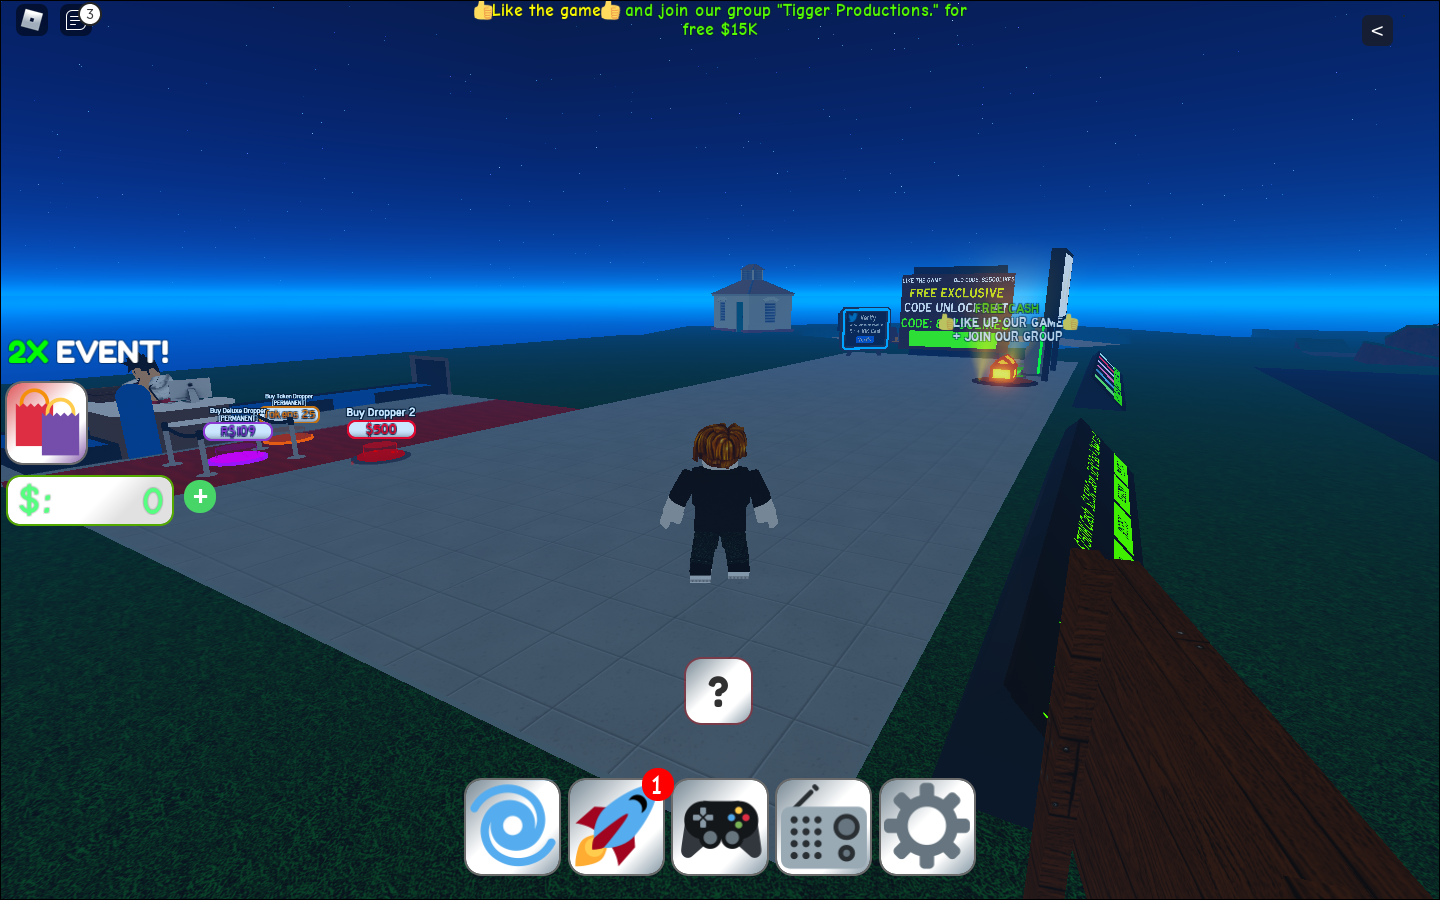 Roblox r Tycoon 2022 